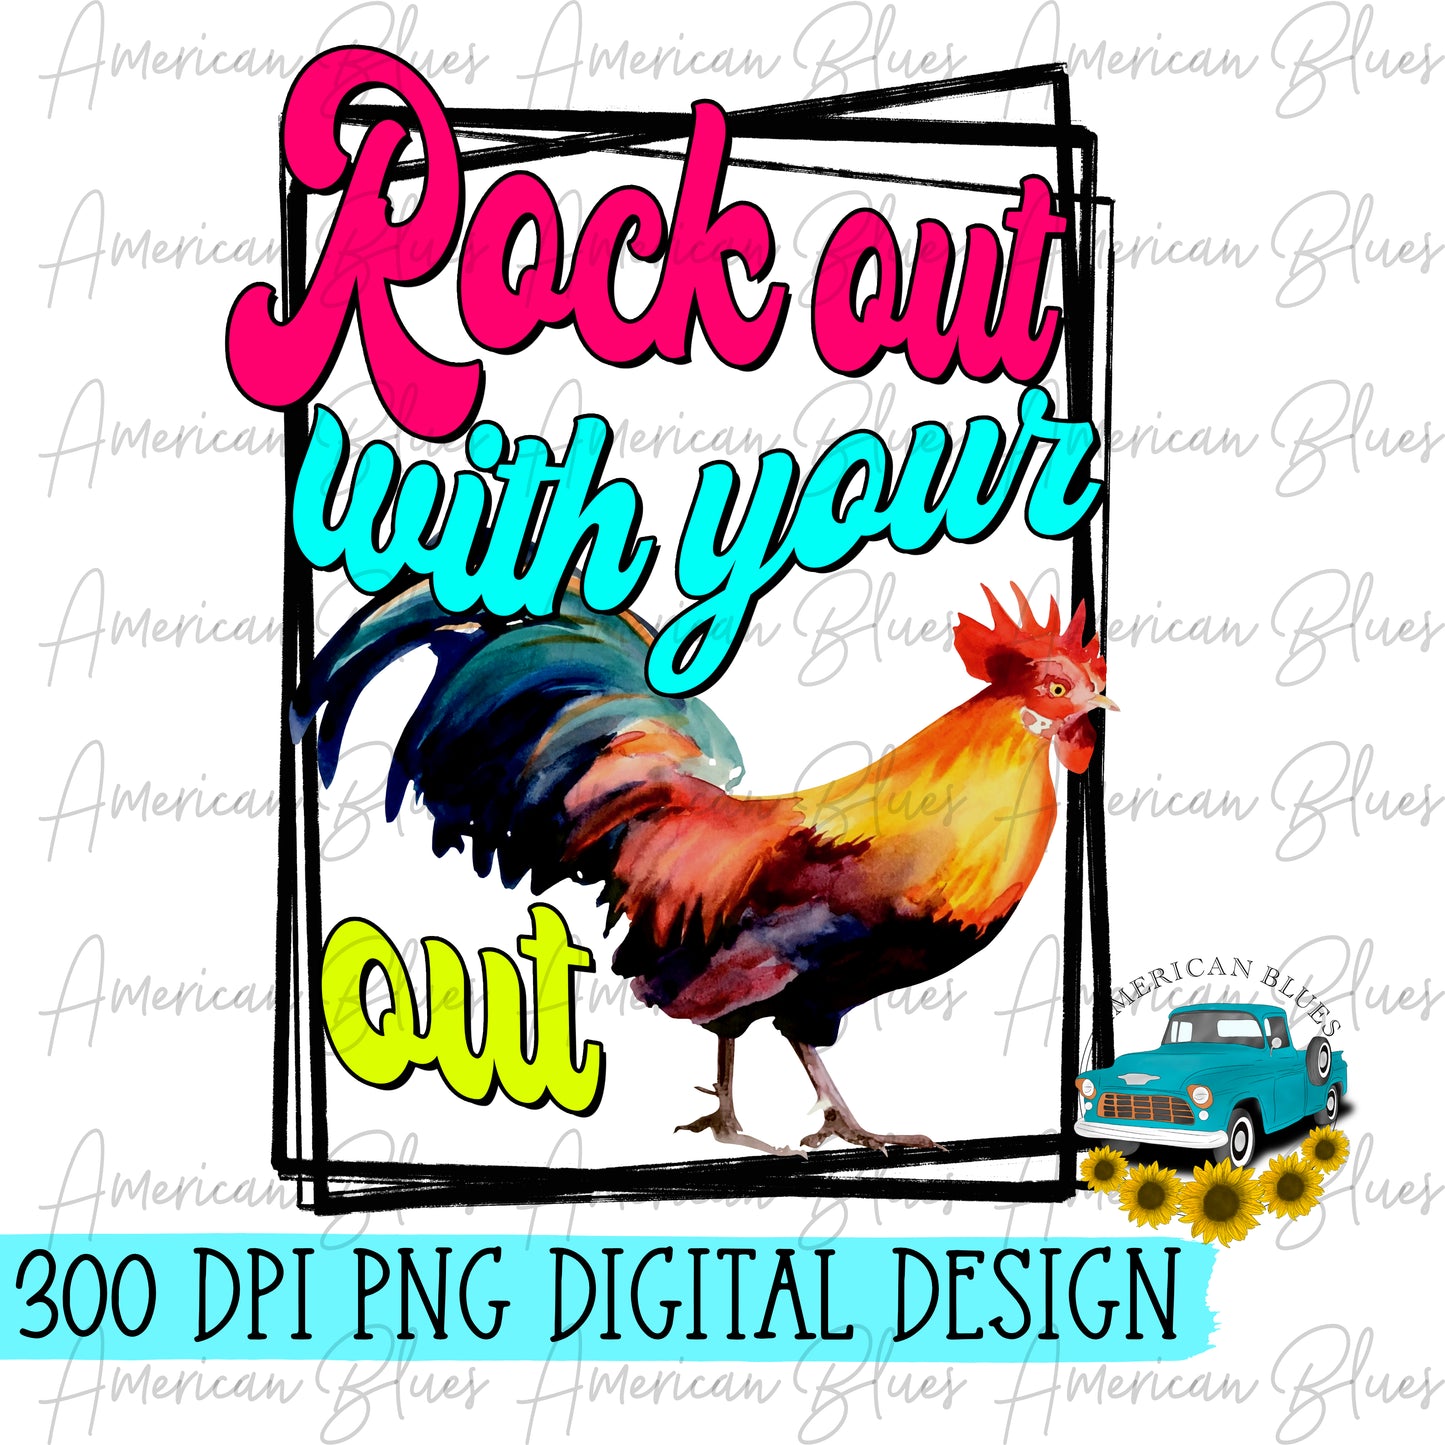 Rock out with your cock out